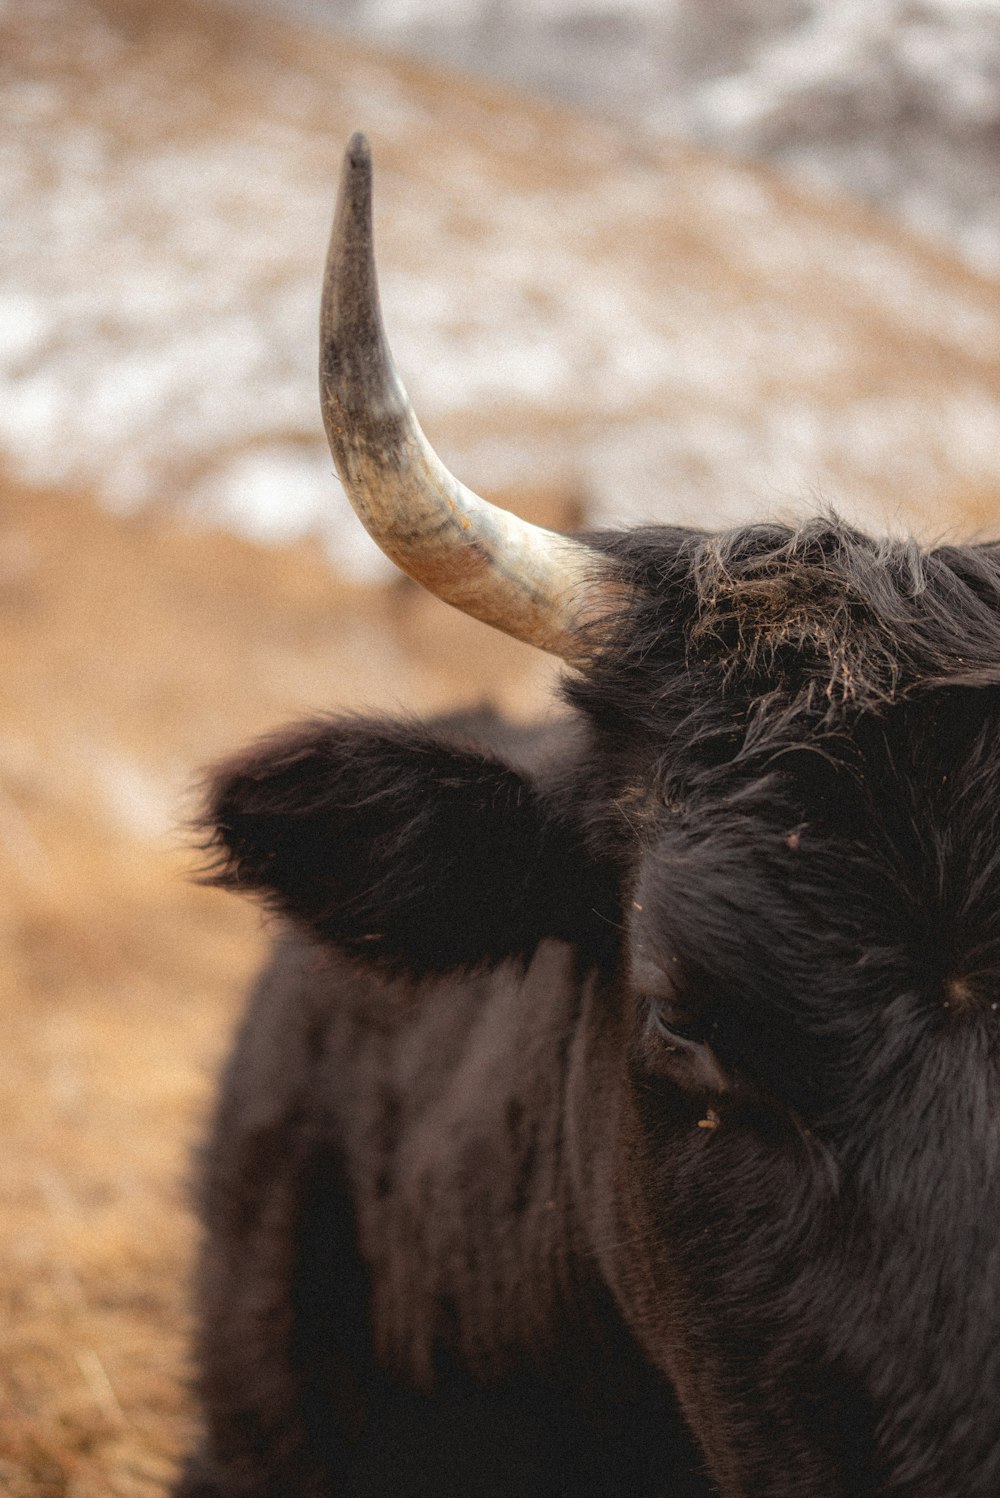 a black bull with large horns standing in a field